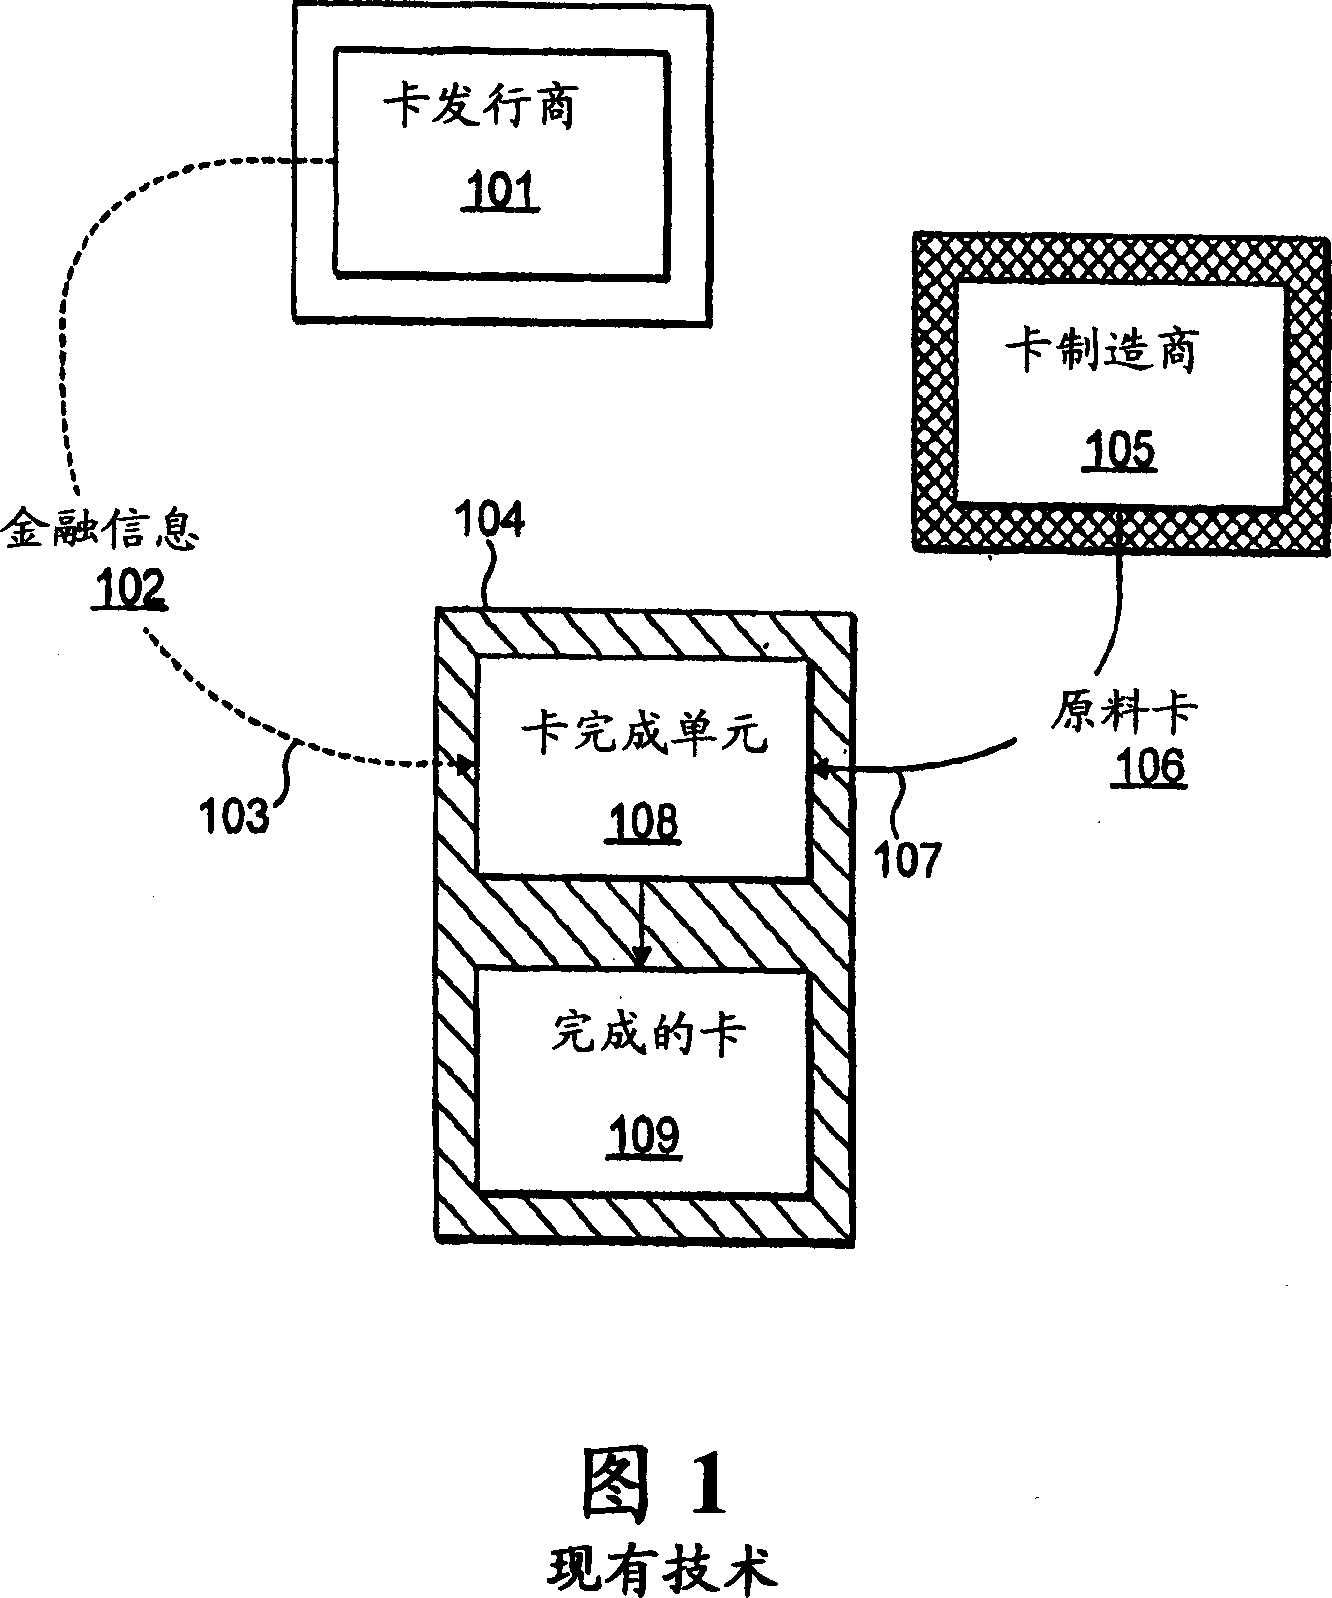 Apparatus and method for production of transaction cards